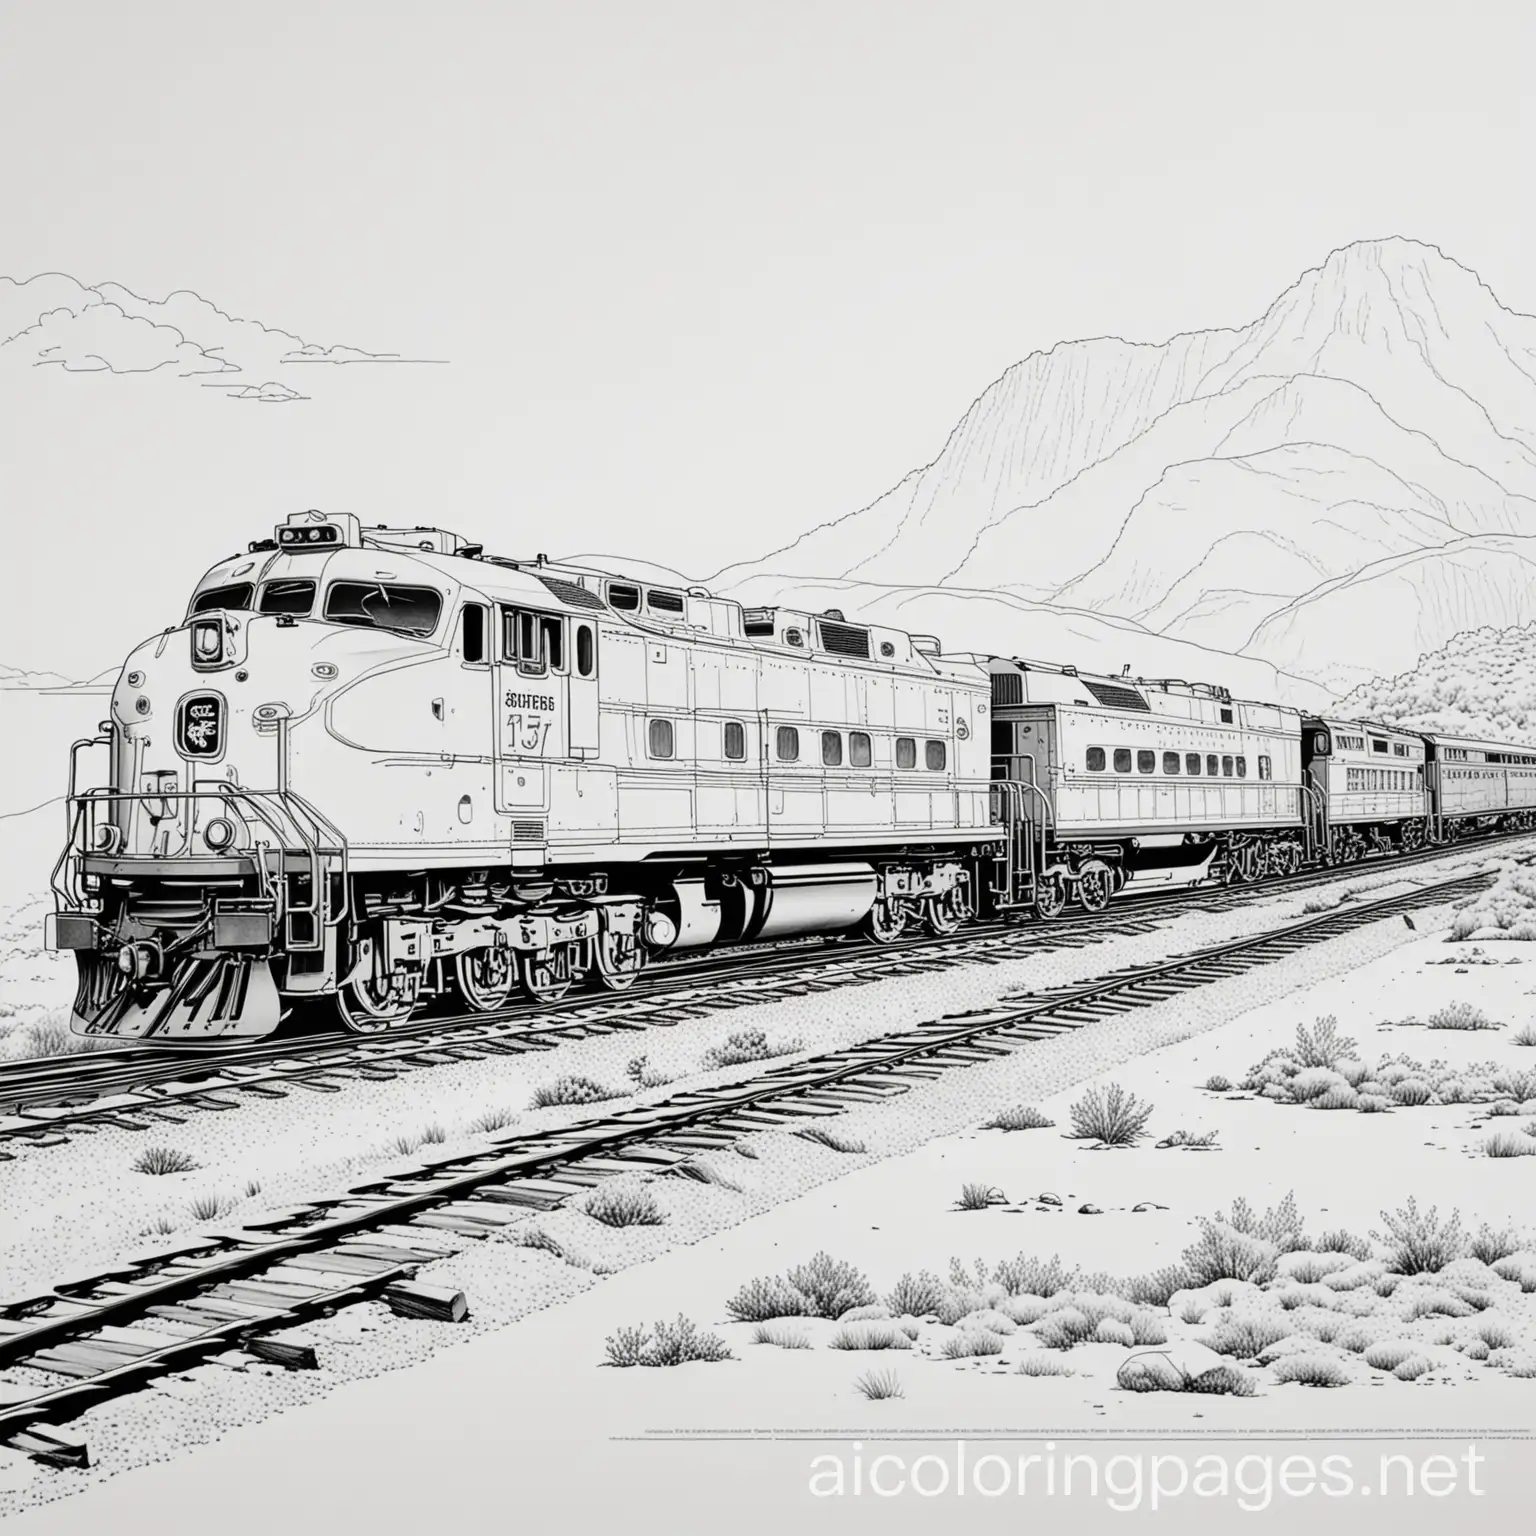 Southern pacific train, Coloring Page, black and white, line art, white background, Simplicity, Ample White Space. The background of the coloring page is plain white to make it easy for young children to color within the lines. The outlines of all the subjects are easy to distinguish, making it simple for kids to color without too much difficulty